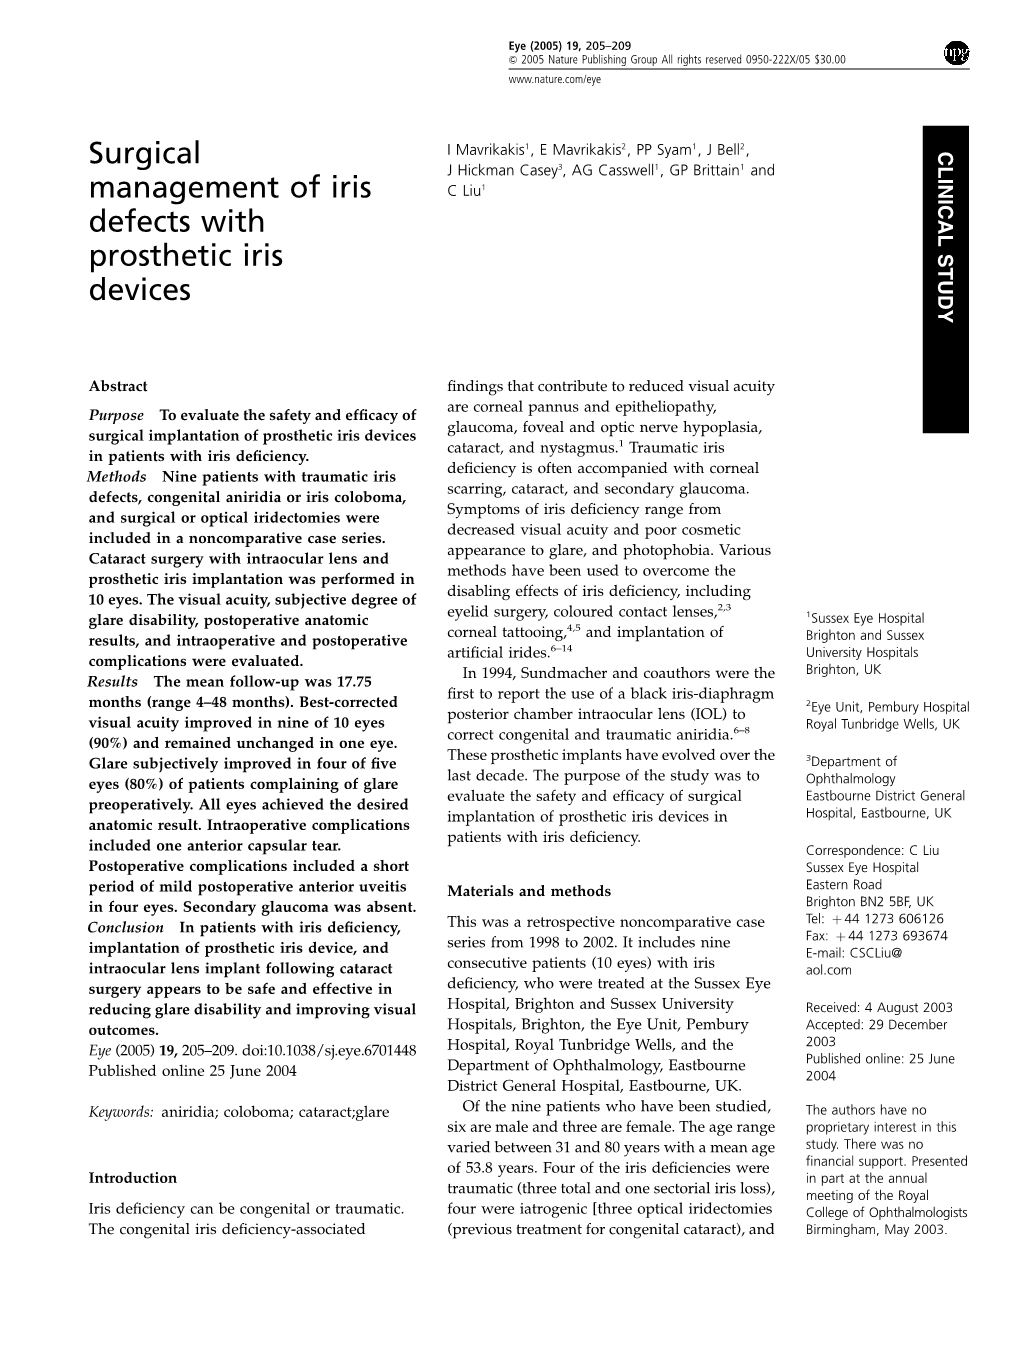 Surgical Management of Iris Defects with Prosthetic Iris Devices